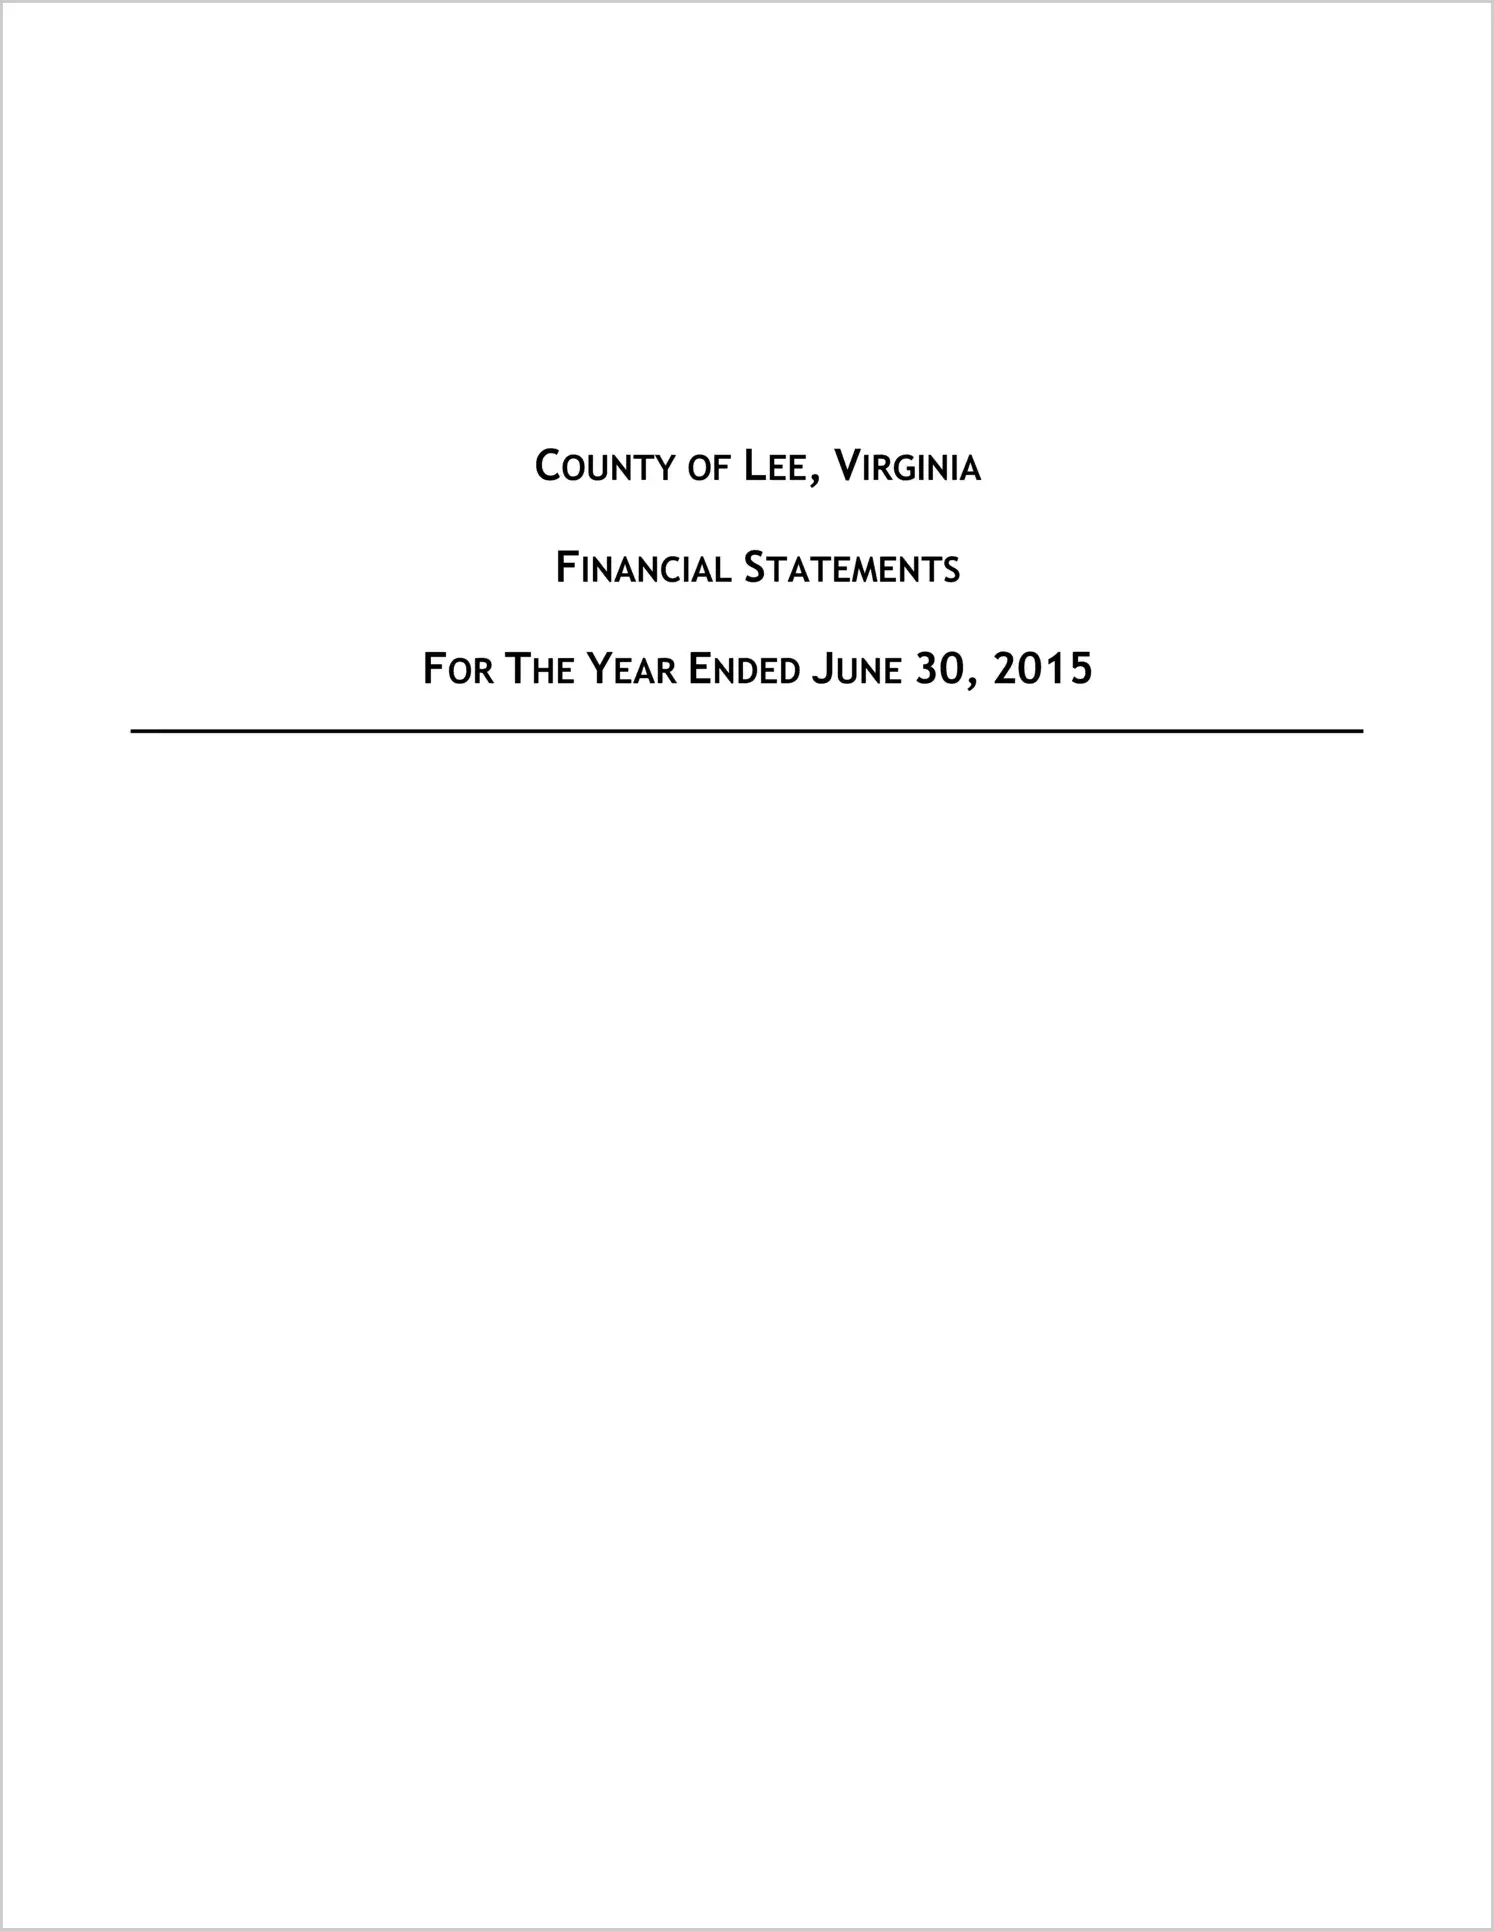 2015 Annual Financial Report for County of Lee